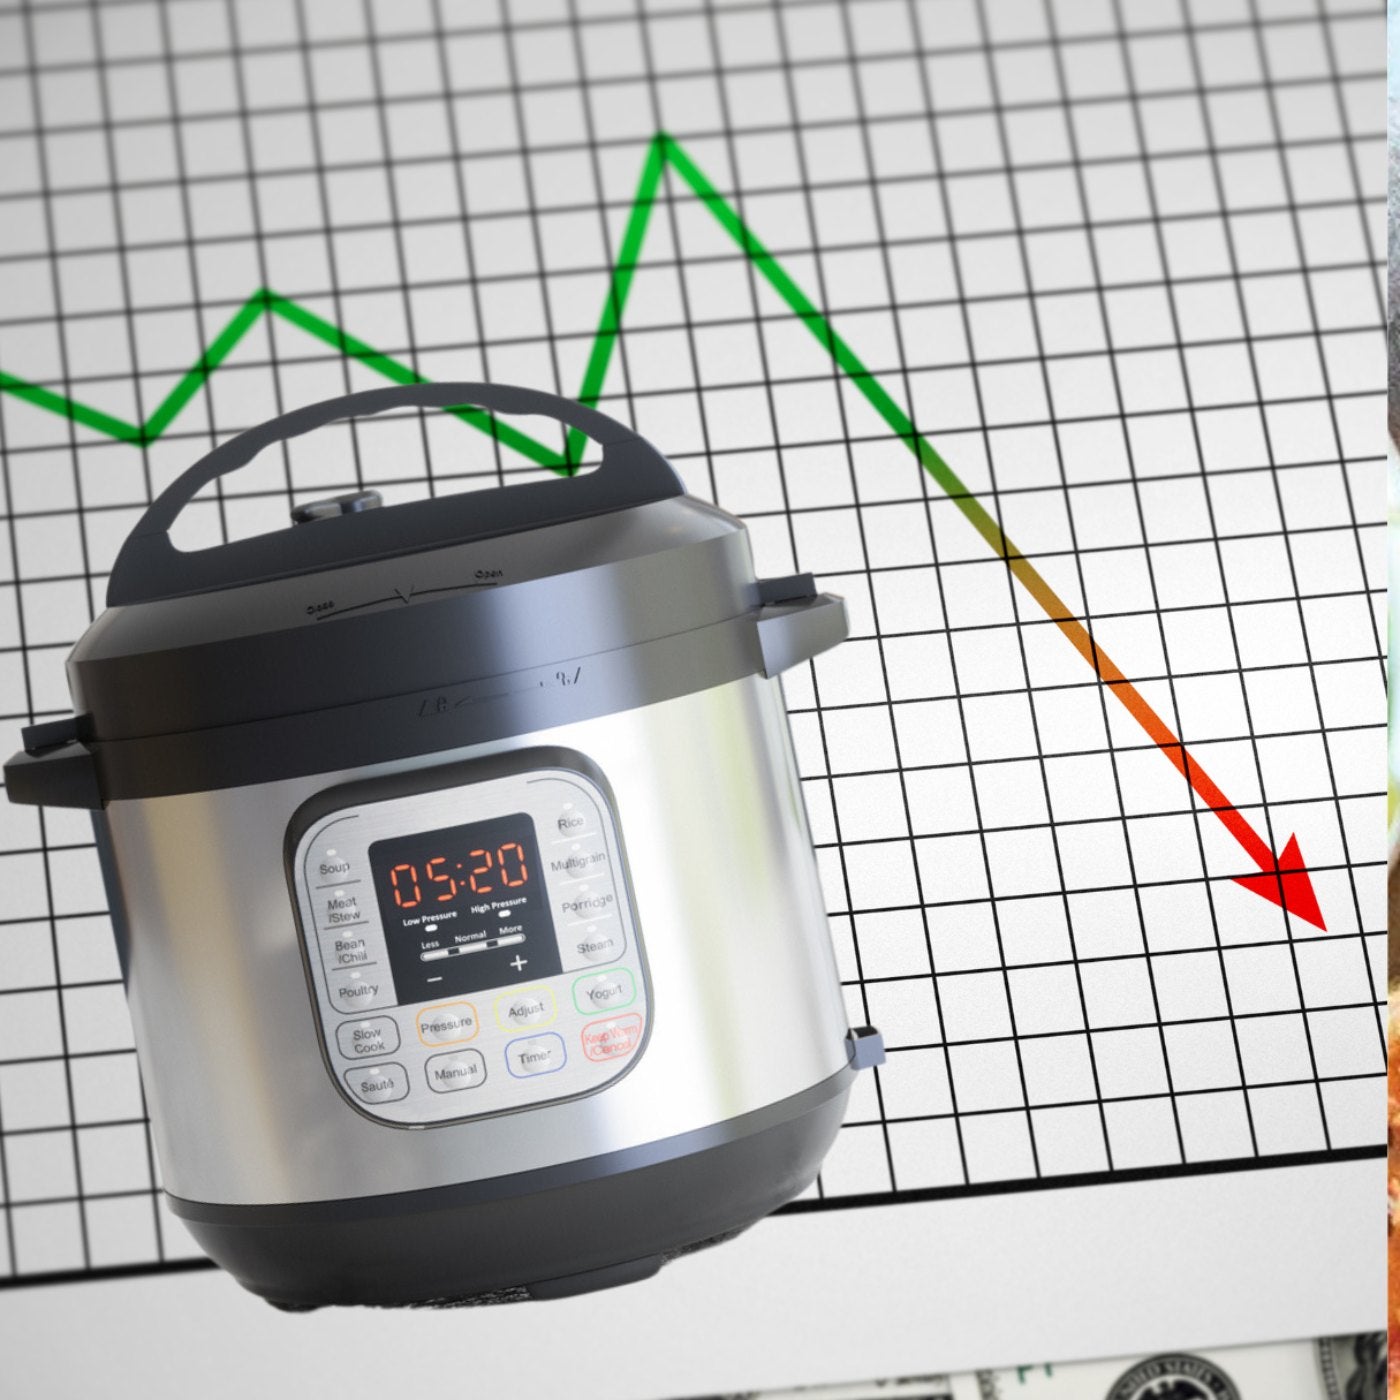 Burned out: How Instant Pot went from cult favorite to Chapter 11  bankruptcy